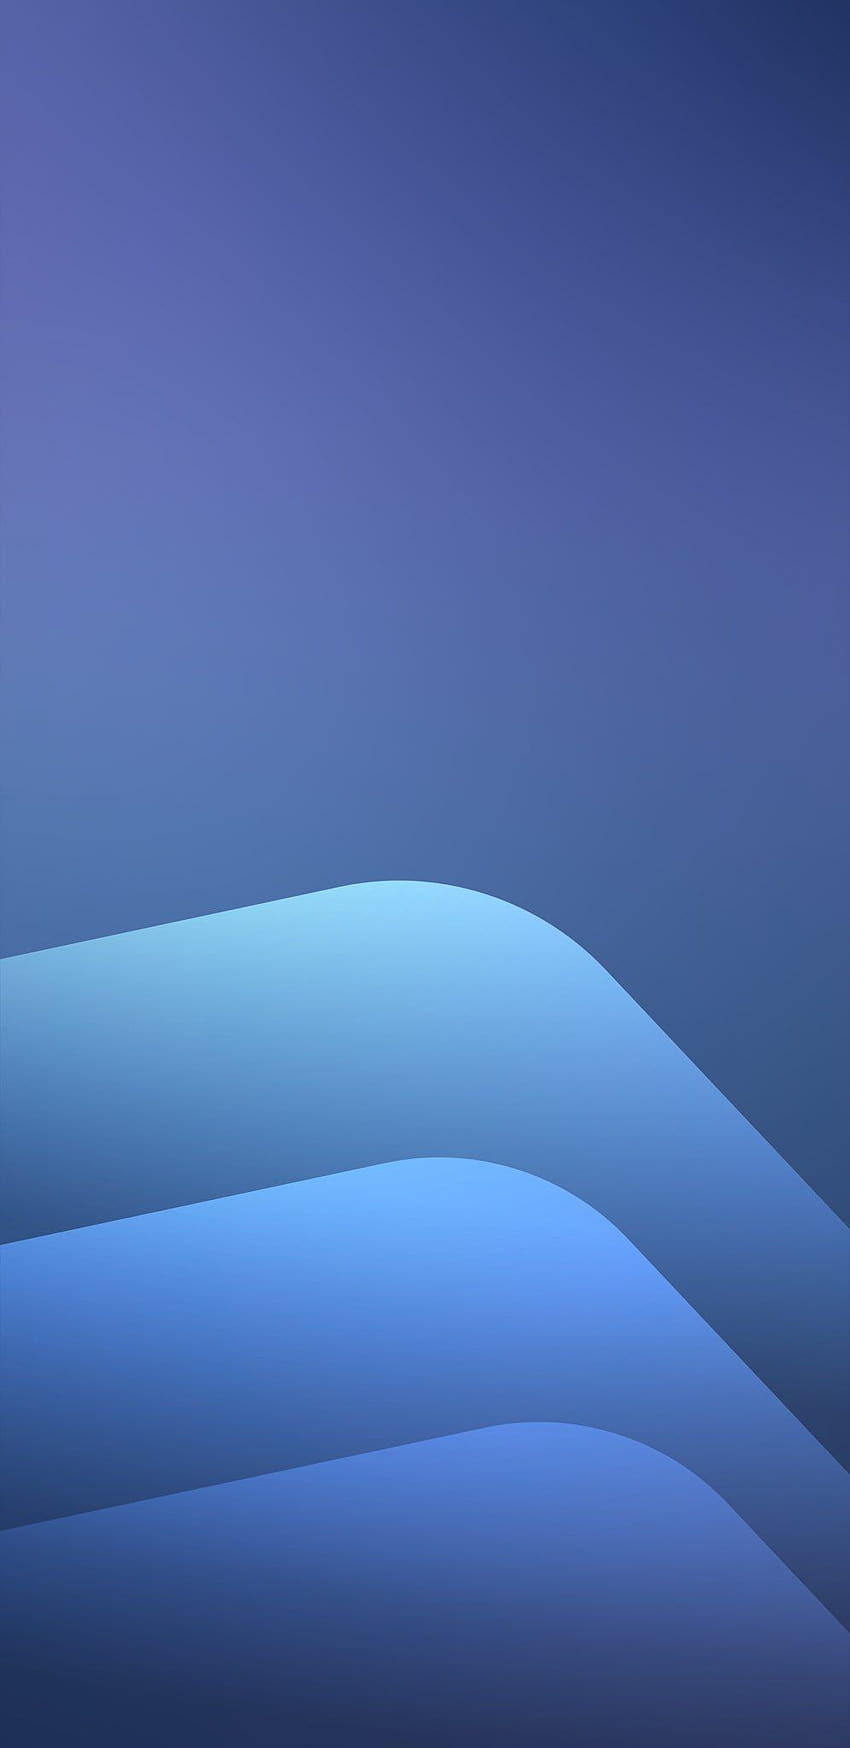 these blue for iPhone, iPad, and Mac, light blue colour HD phone wallpaper